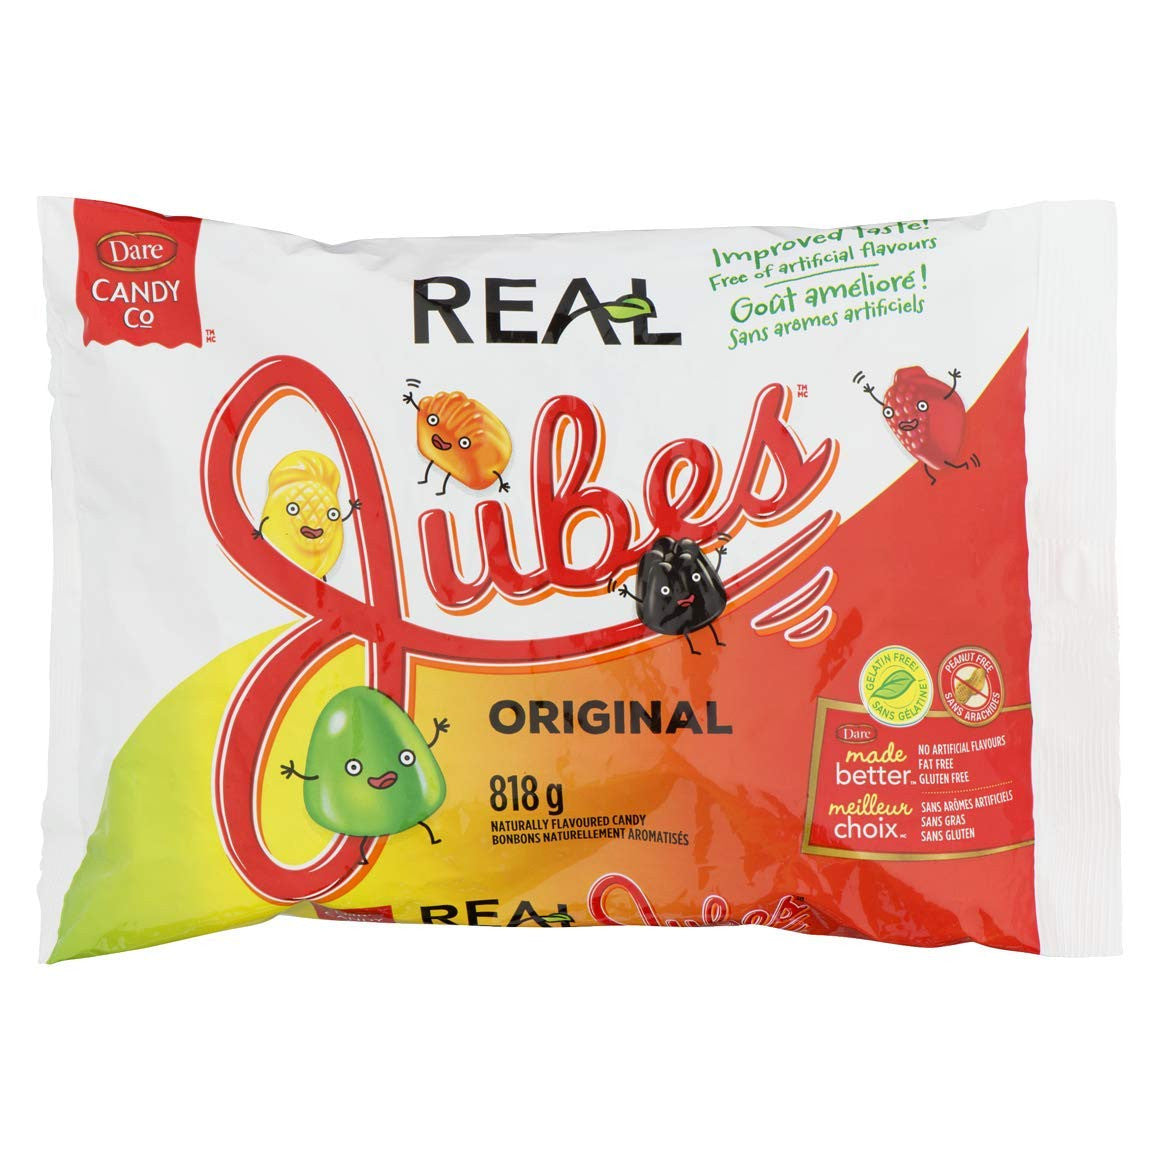 Dare Real Jubes, ORIGINAL, Gummies,  818g/ 28.9oz., {Imported from Canada}